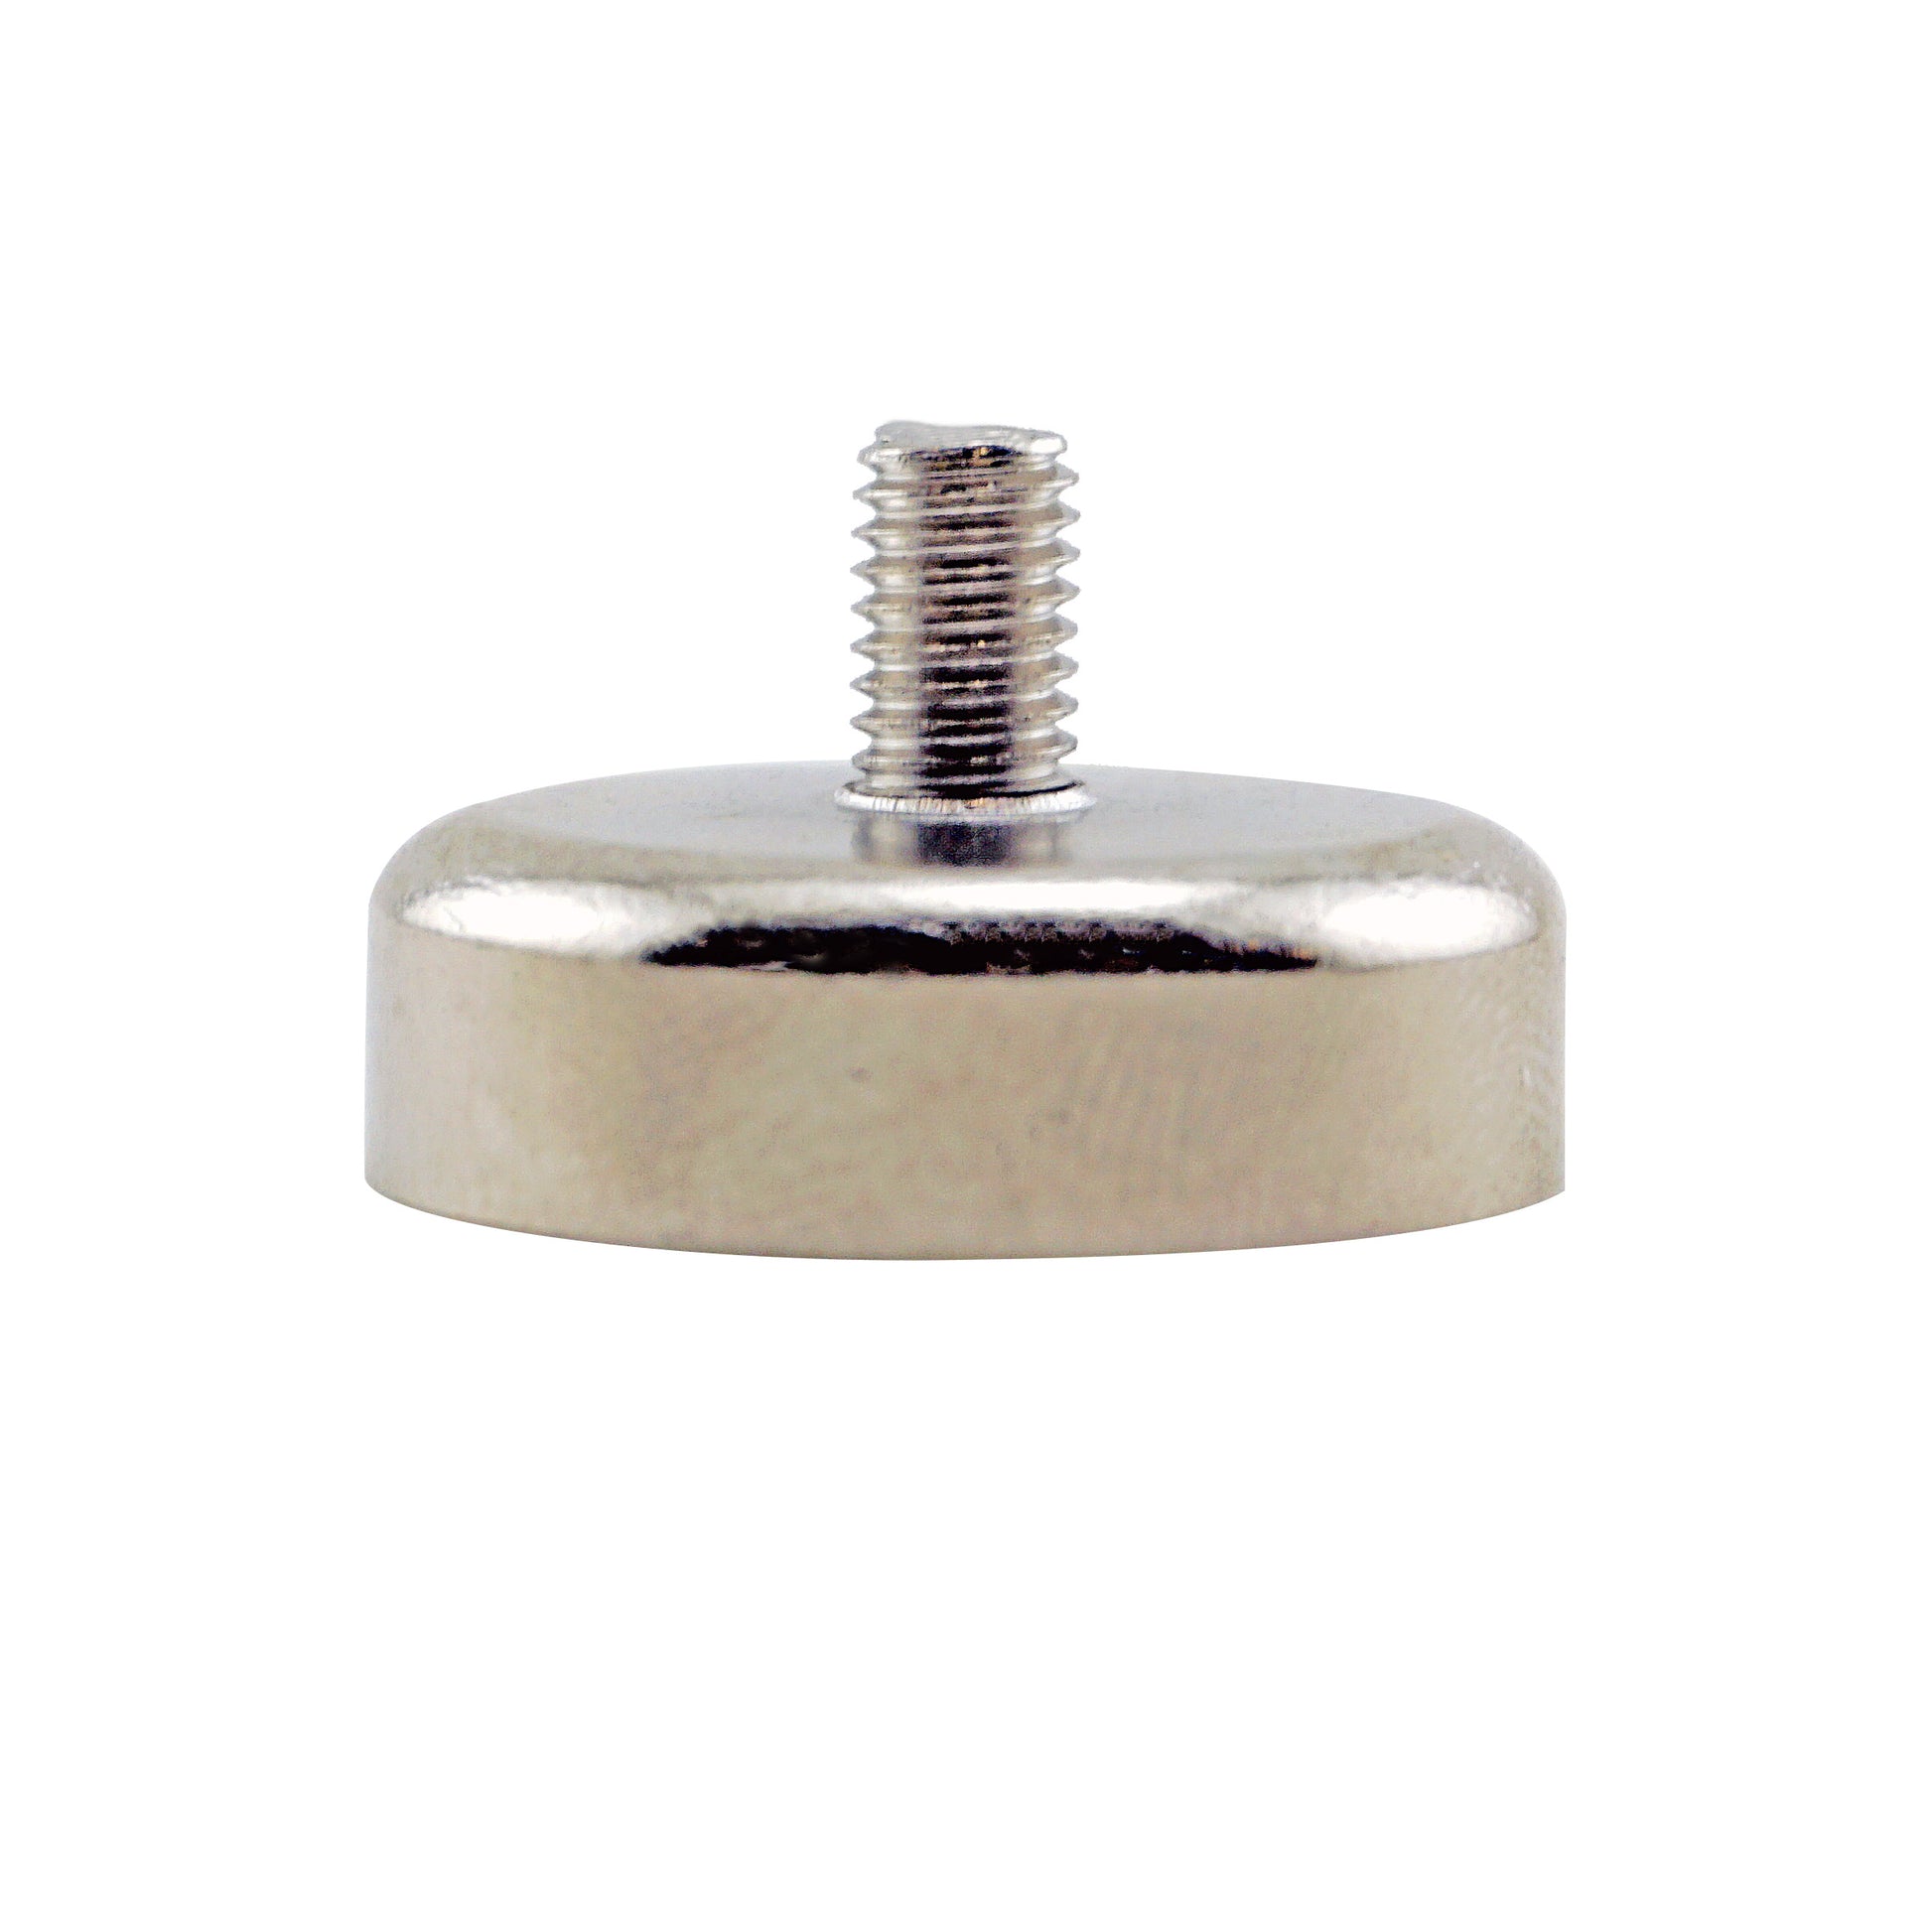 Load image into Gallery viewer, CACM098S01 Ceramic Round Base Magnet with Male Thread - Front View